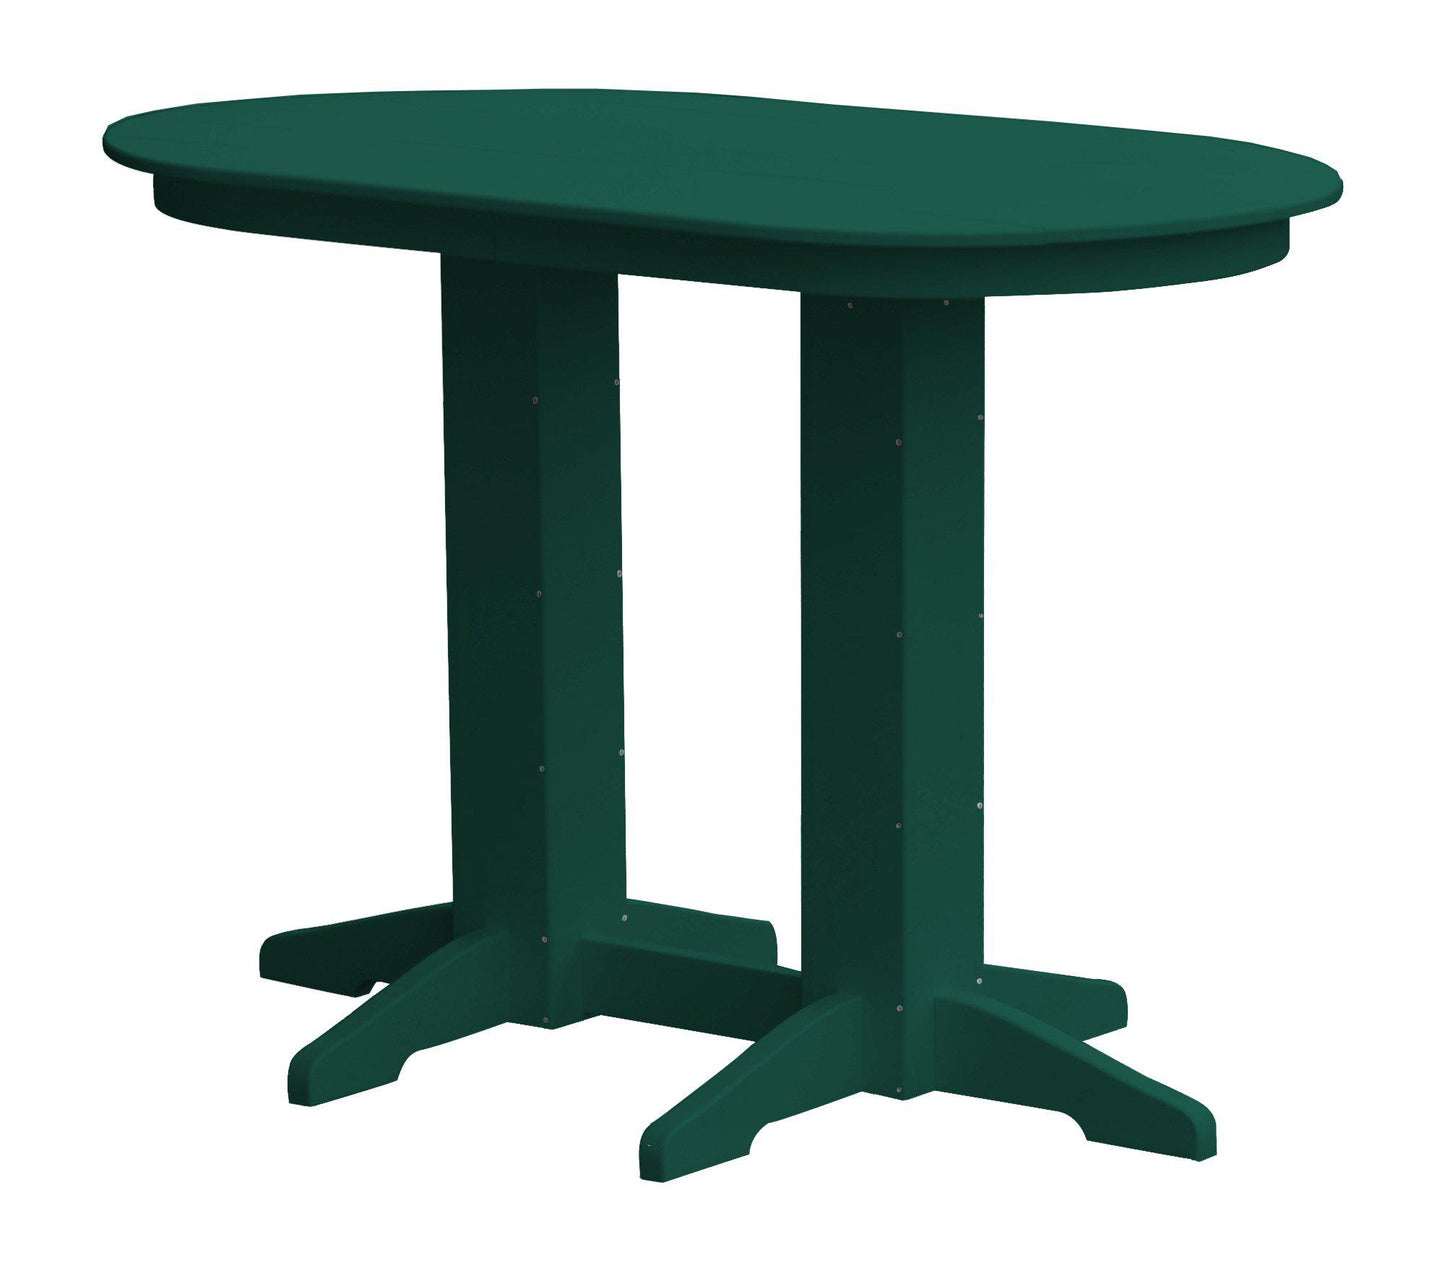 A&L Furniture Recycled Plastic 5' Oval Bar Table - Turf Green